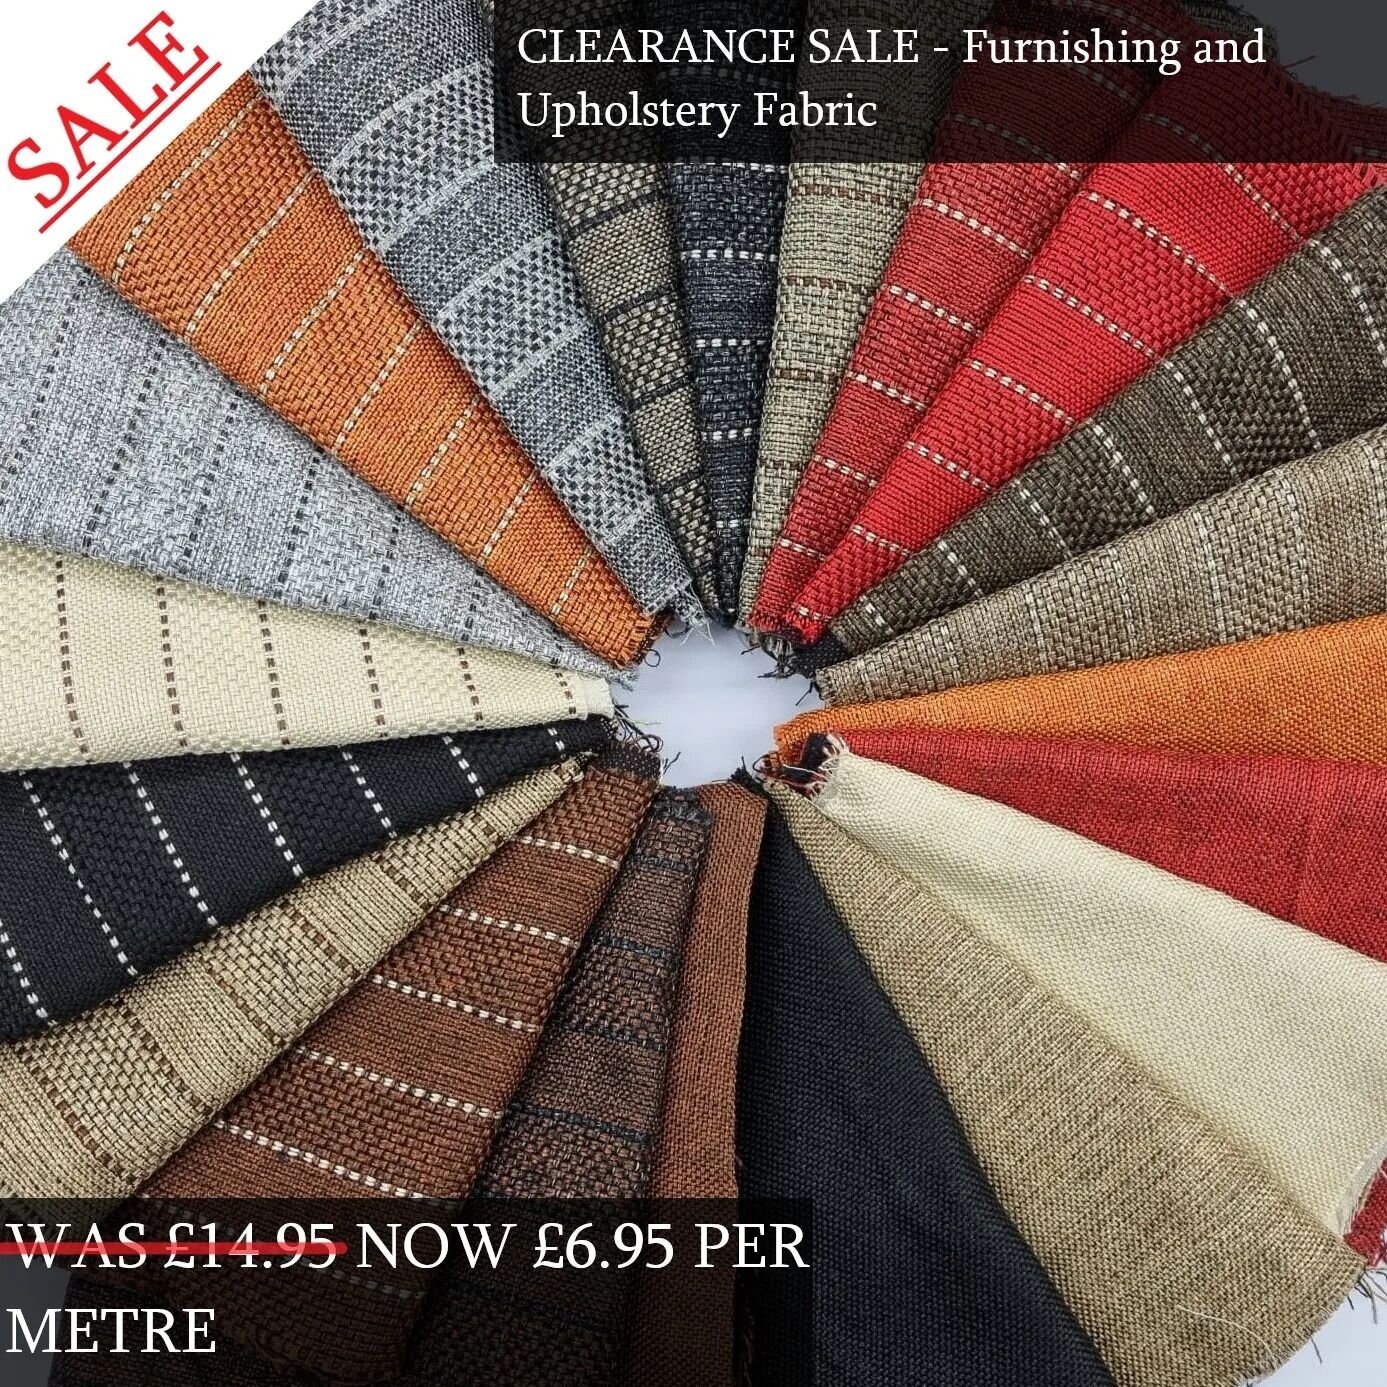 ULTIMATE CRAFT CLEARANCE SALE!

Furnishing and Upholstery Fabrics ON SALE

WAS &pound;14.95 NOW &pound;6.95 PER METRE

SHOP NOW AT
ultimatecraft.co.uk
.
.
.
.
.
.
.
.
.
.
#furnishingfabrics #upholstery #curtainfabric #homefurnishings #upholsteryshop 